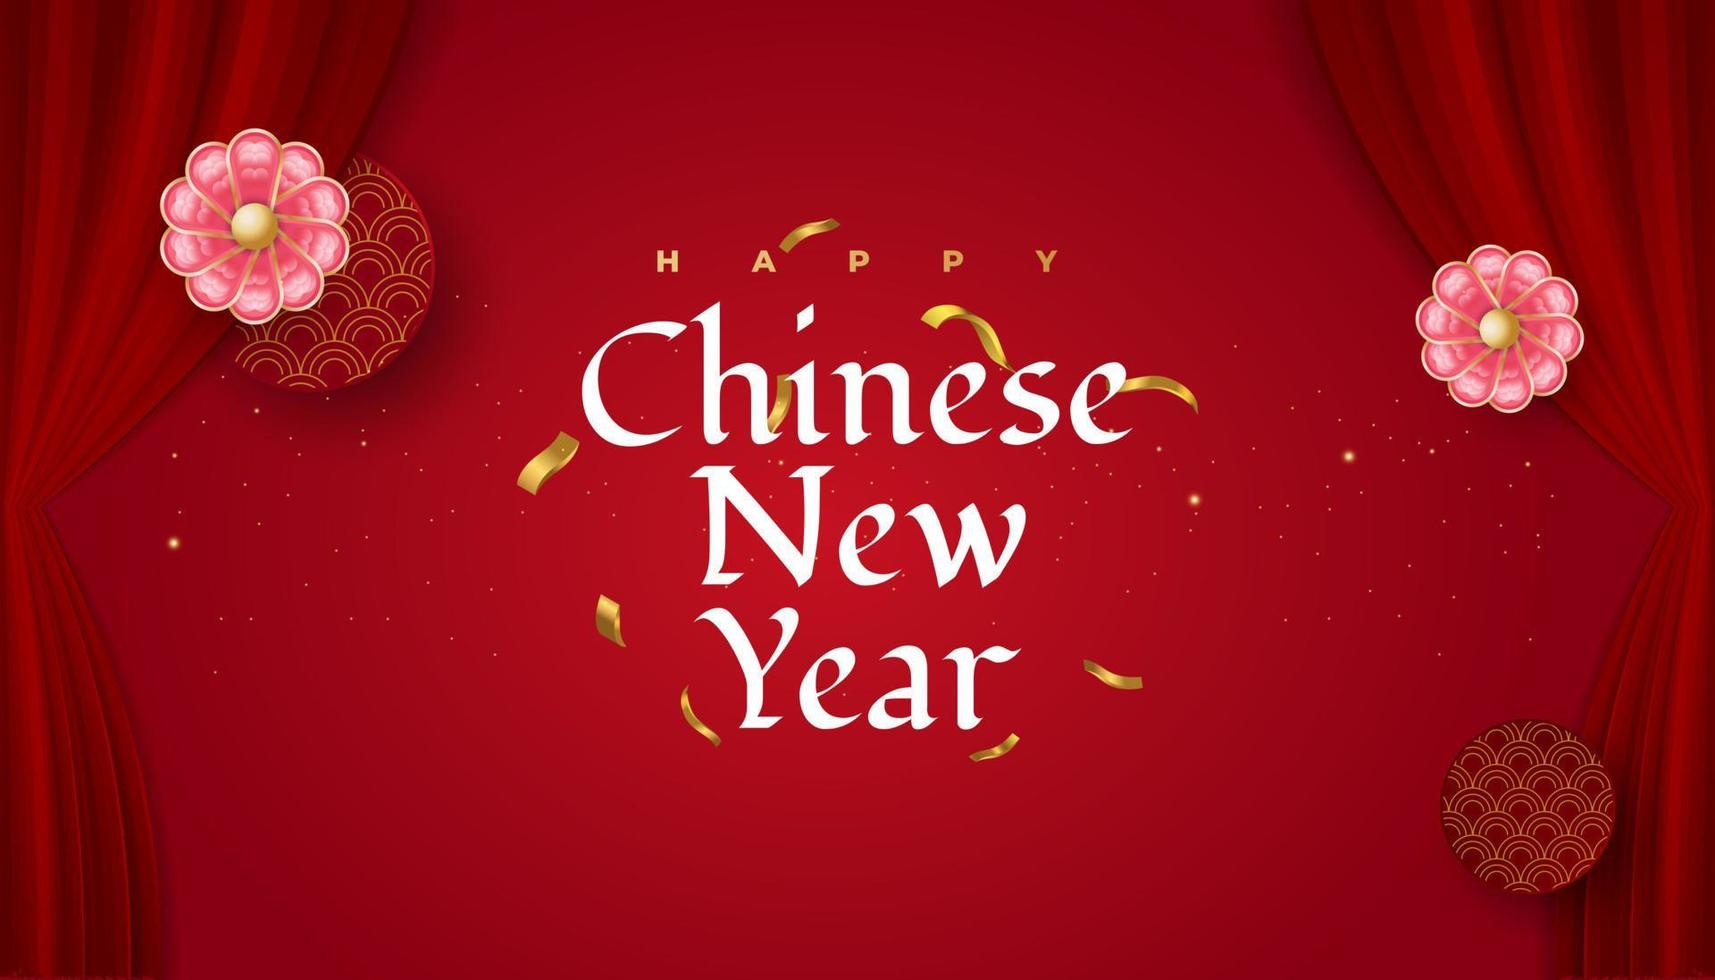 Chinese New Year Greeting Banner with Flowers, Oriental Pattern, and Gold Confetti Isolated on Red Background vector